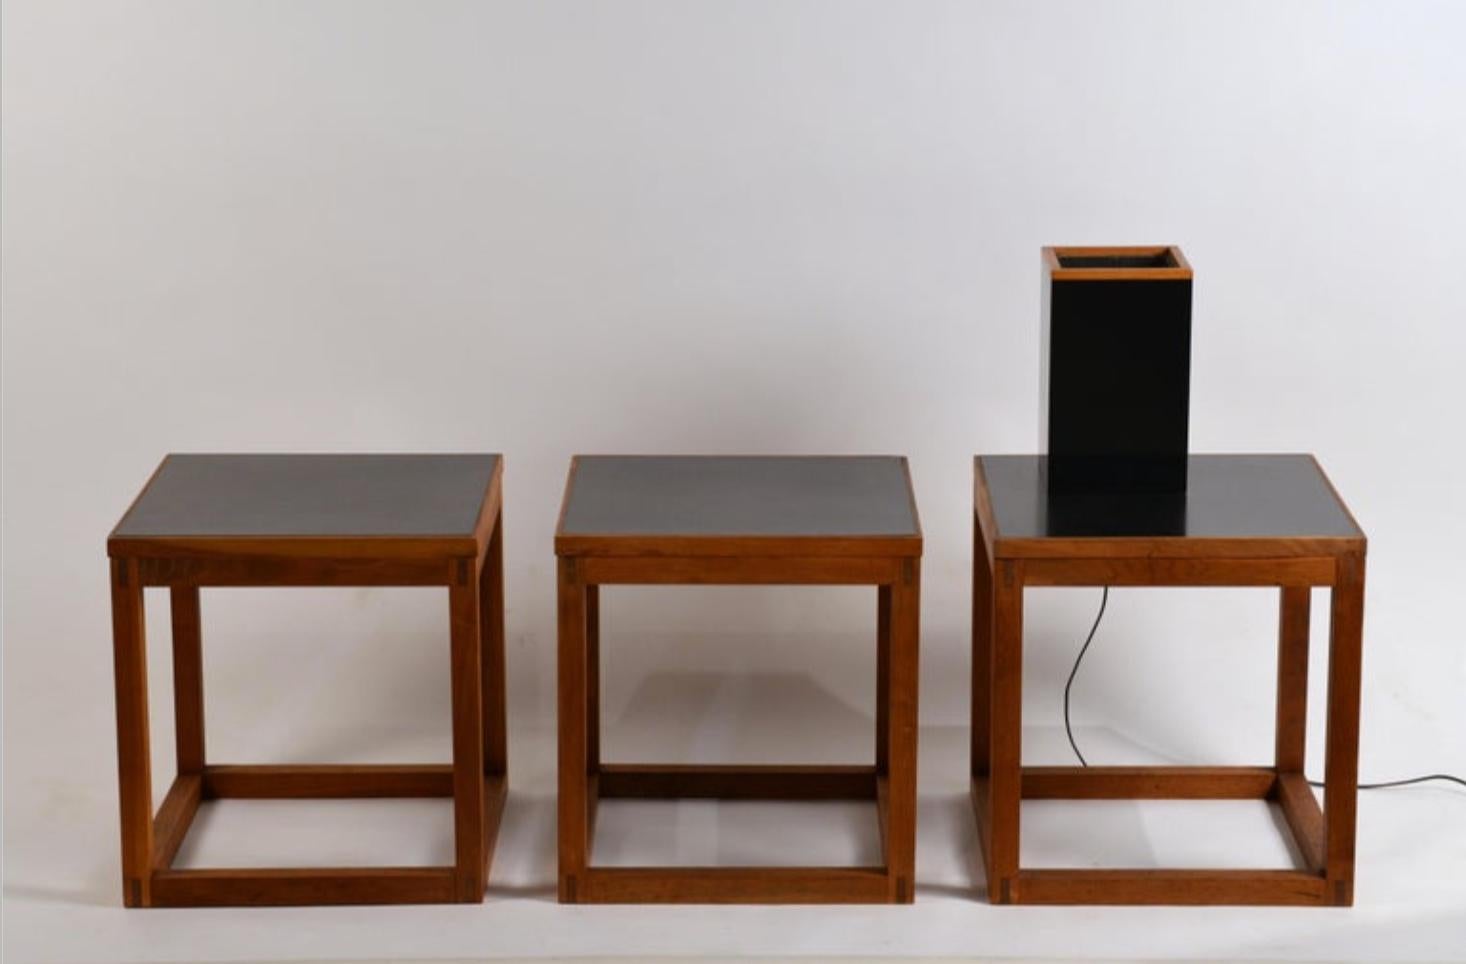 Set of 3 Minimal Teak and Laminate Cube Tables with Matching Lamp For Sale 1